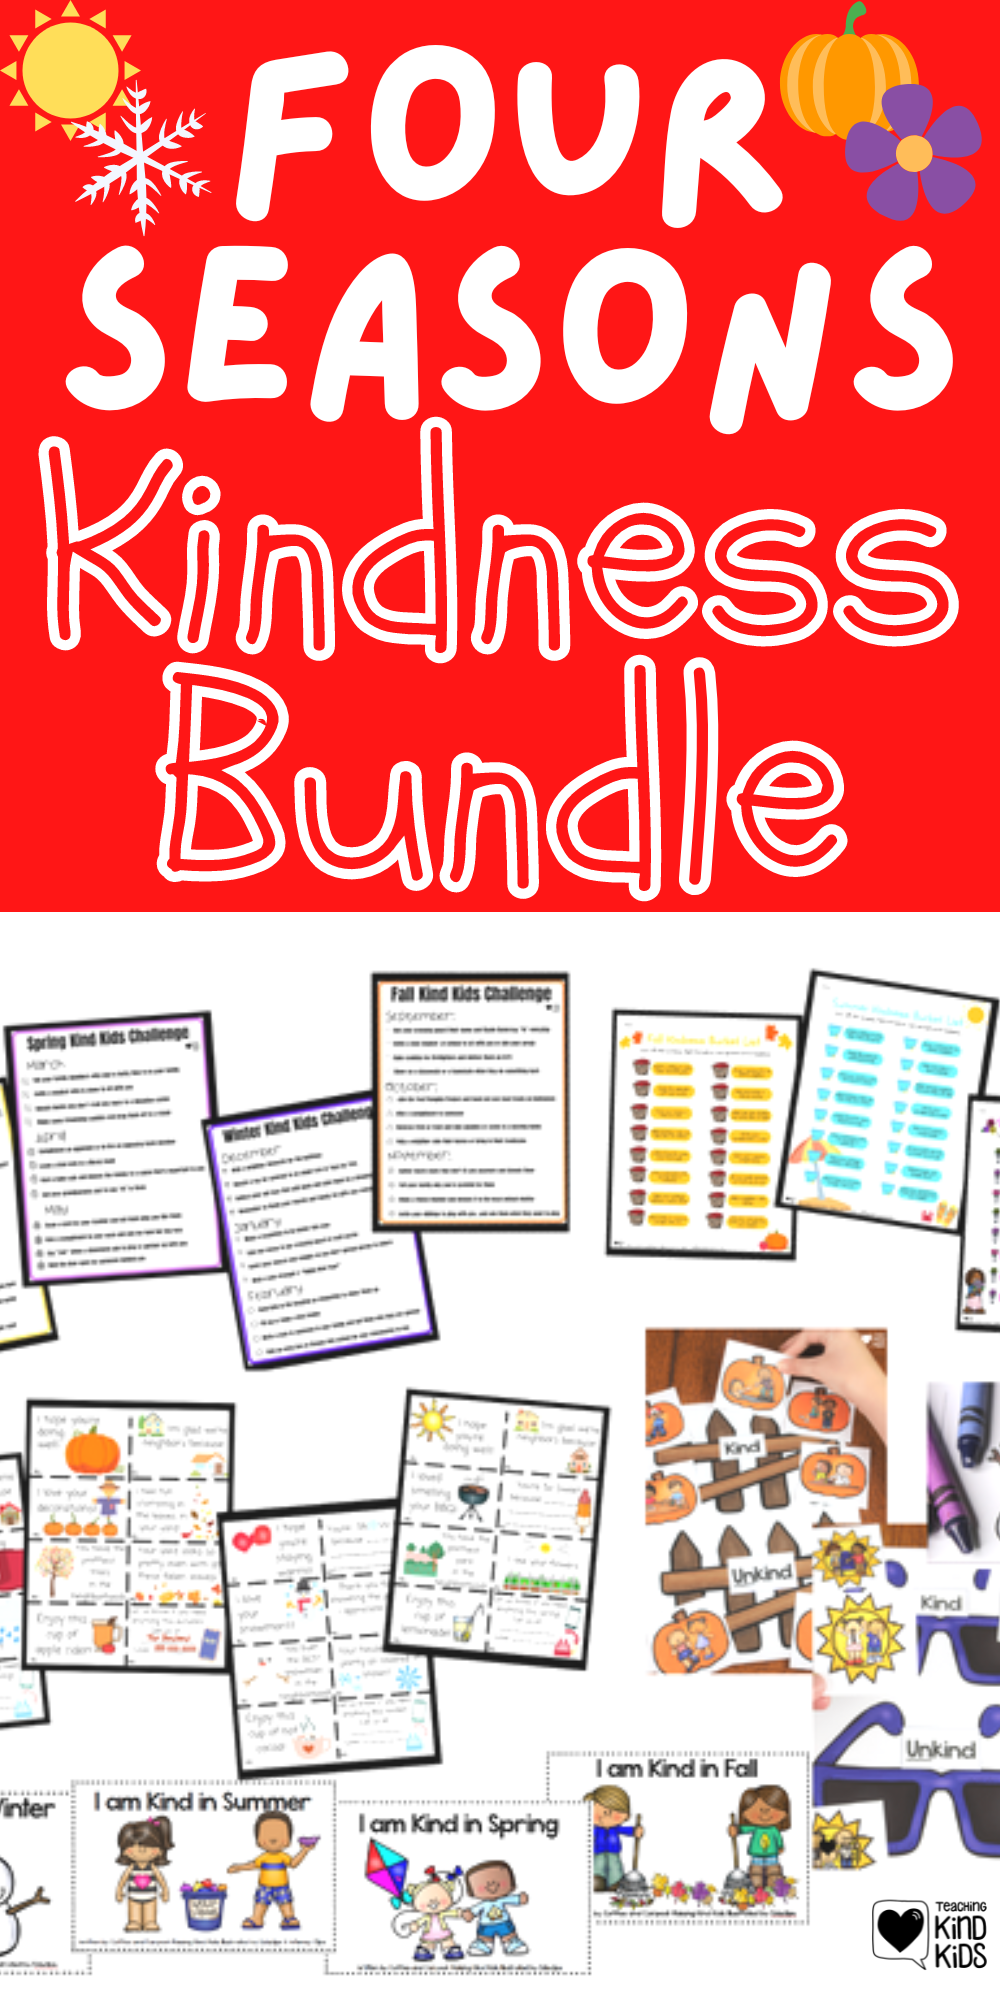 Use these four seasons kindness activities to teach about winter, spring, summer and fall and kindness at the same time.